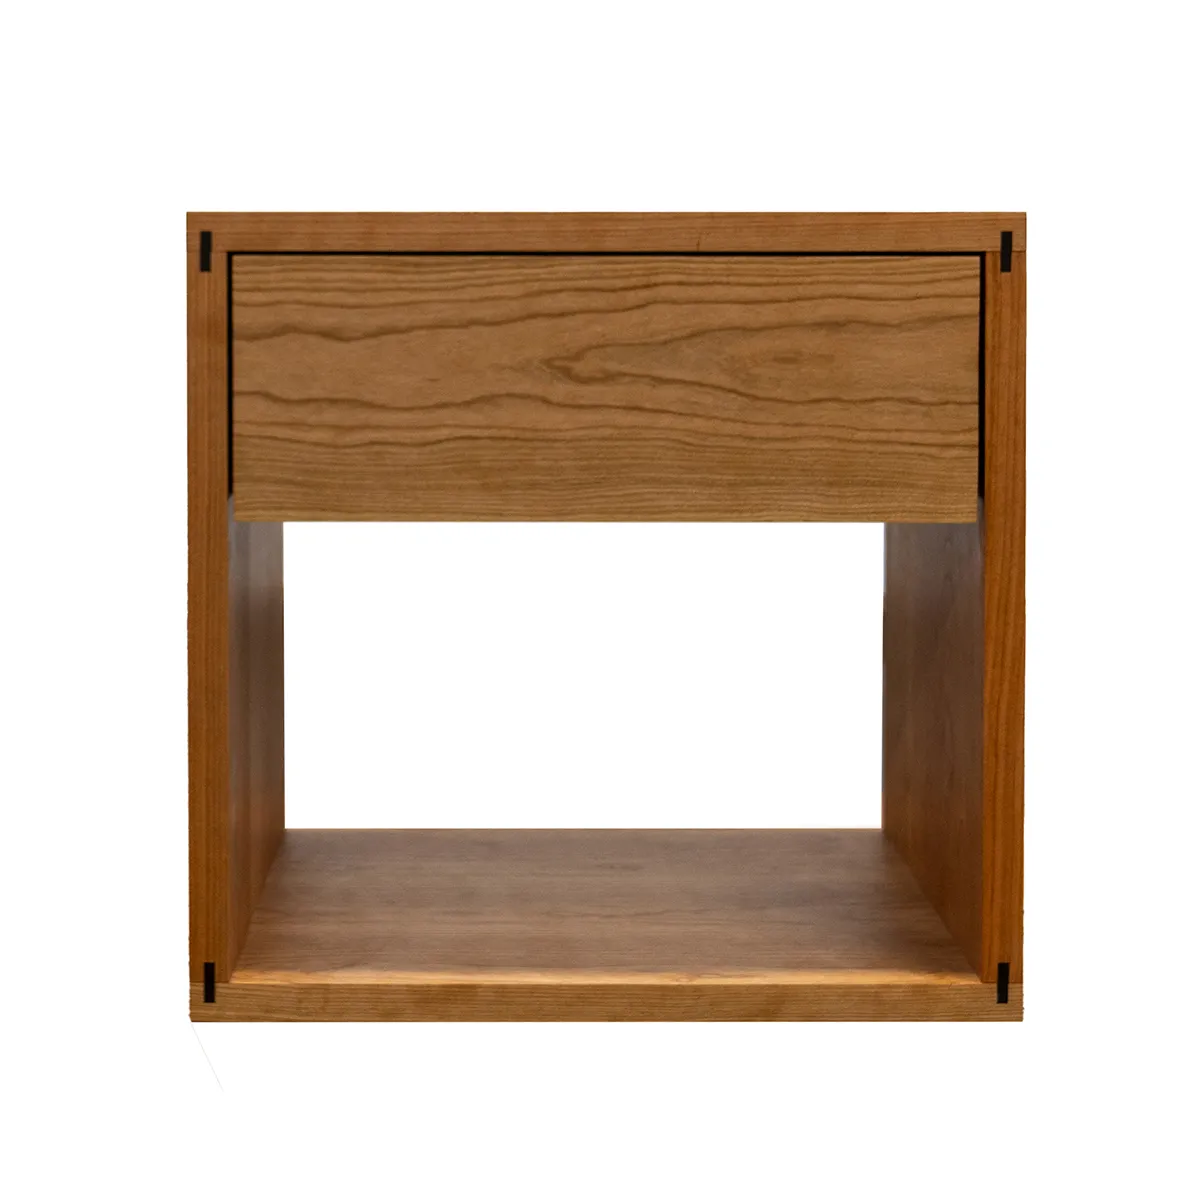 The Nightstand but in cherry